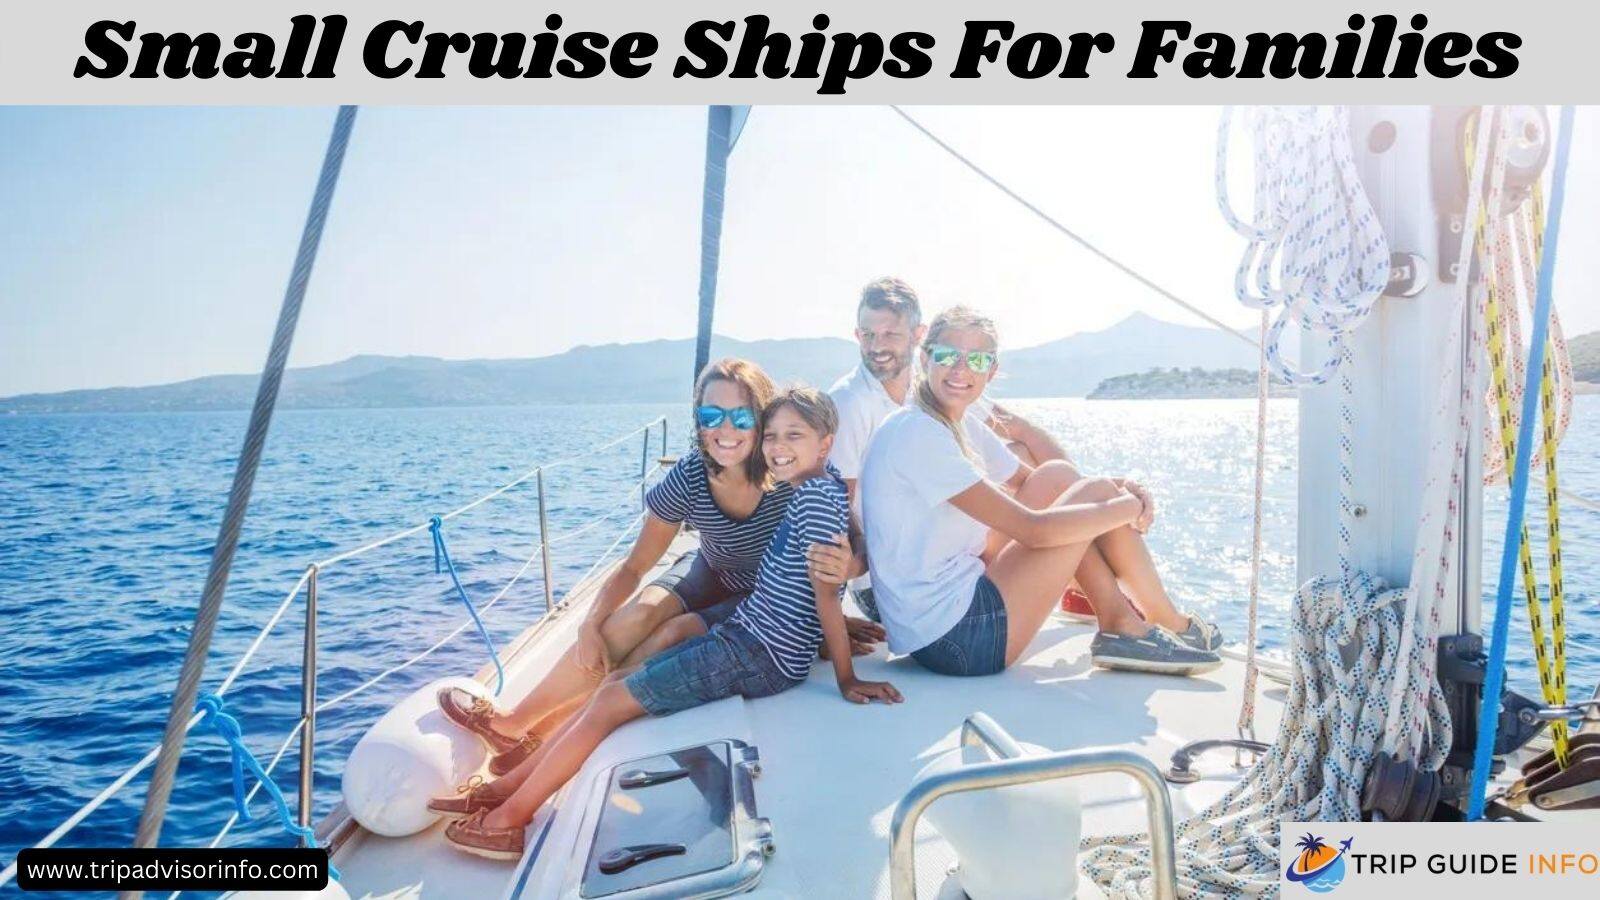 Discovering Unrivaled Fun On Small Cruise Ships For Families